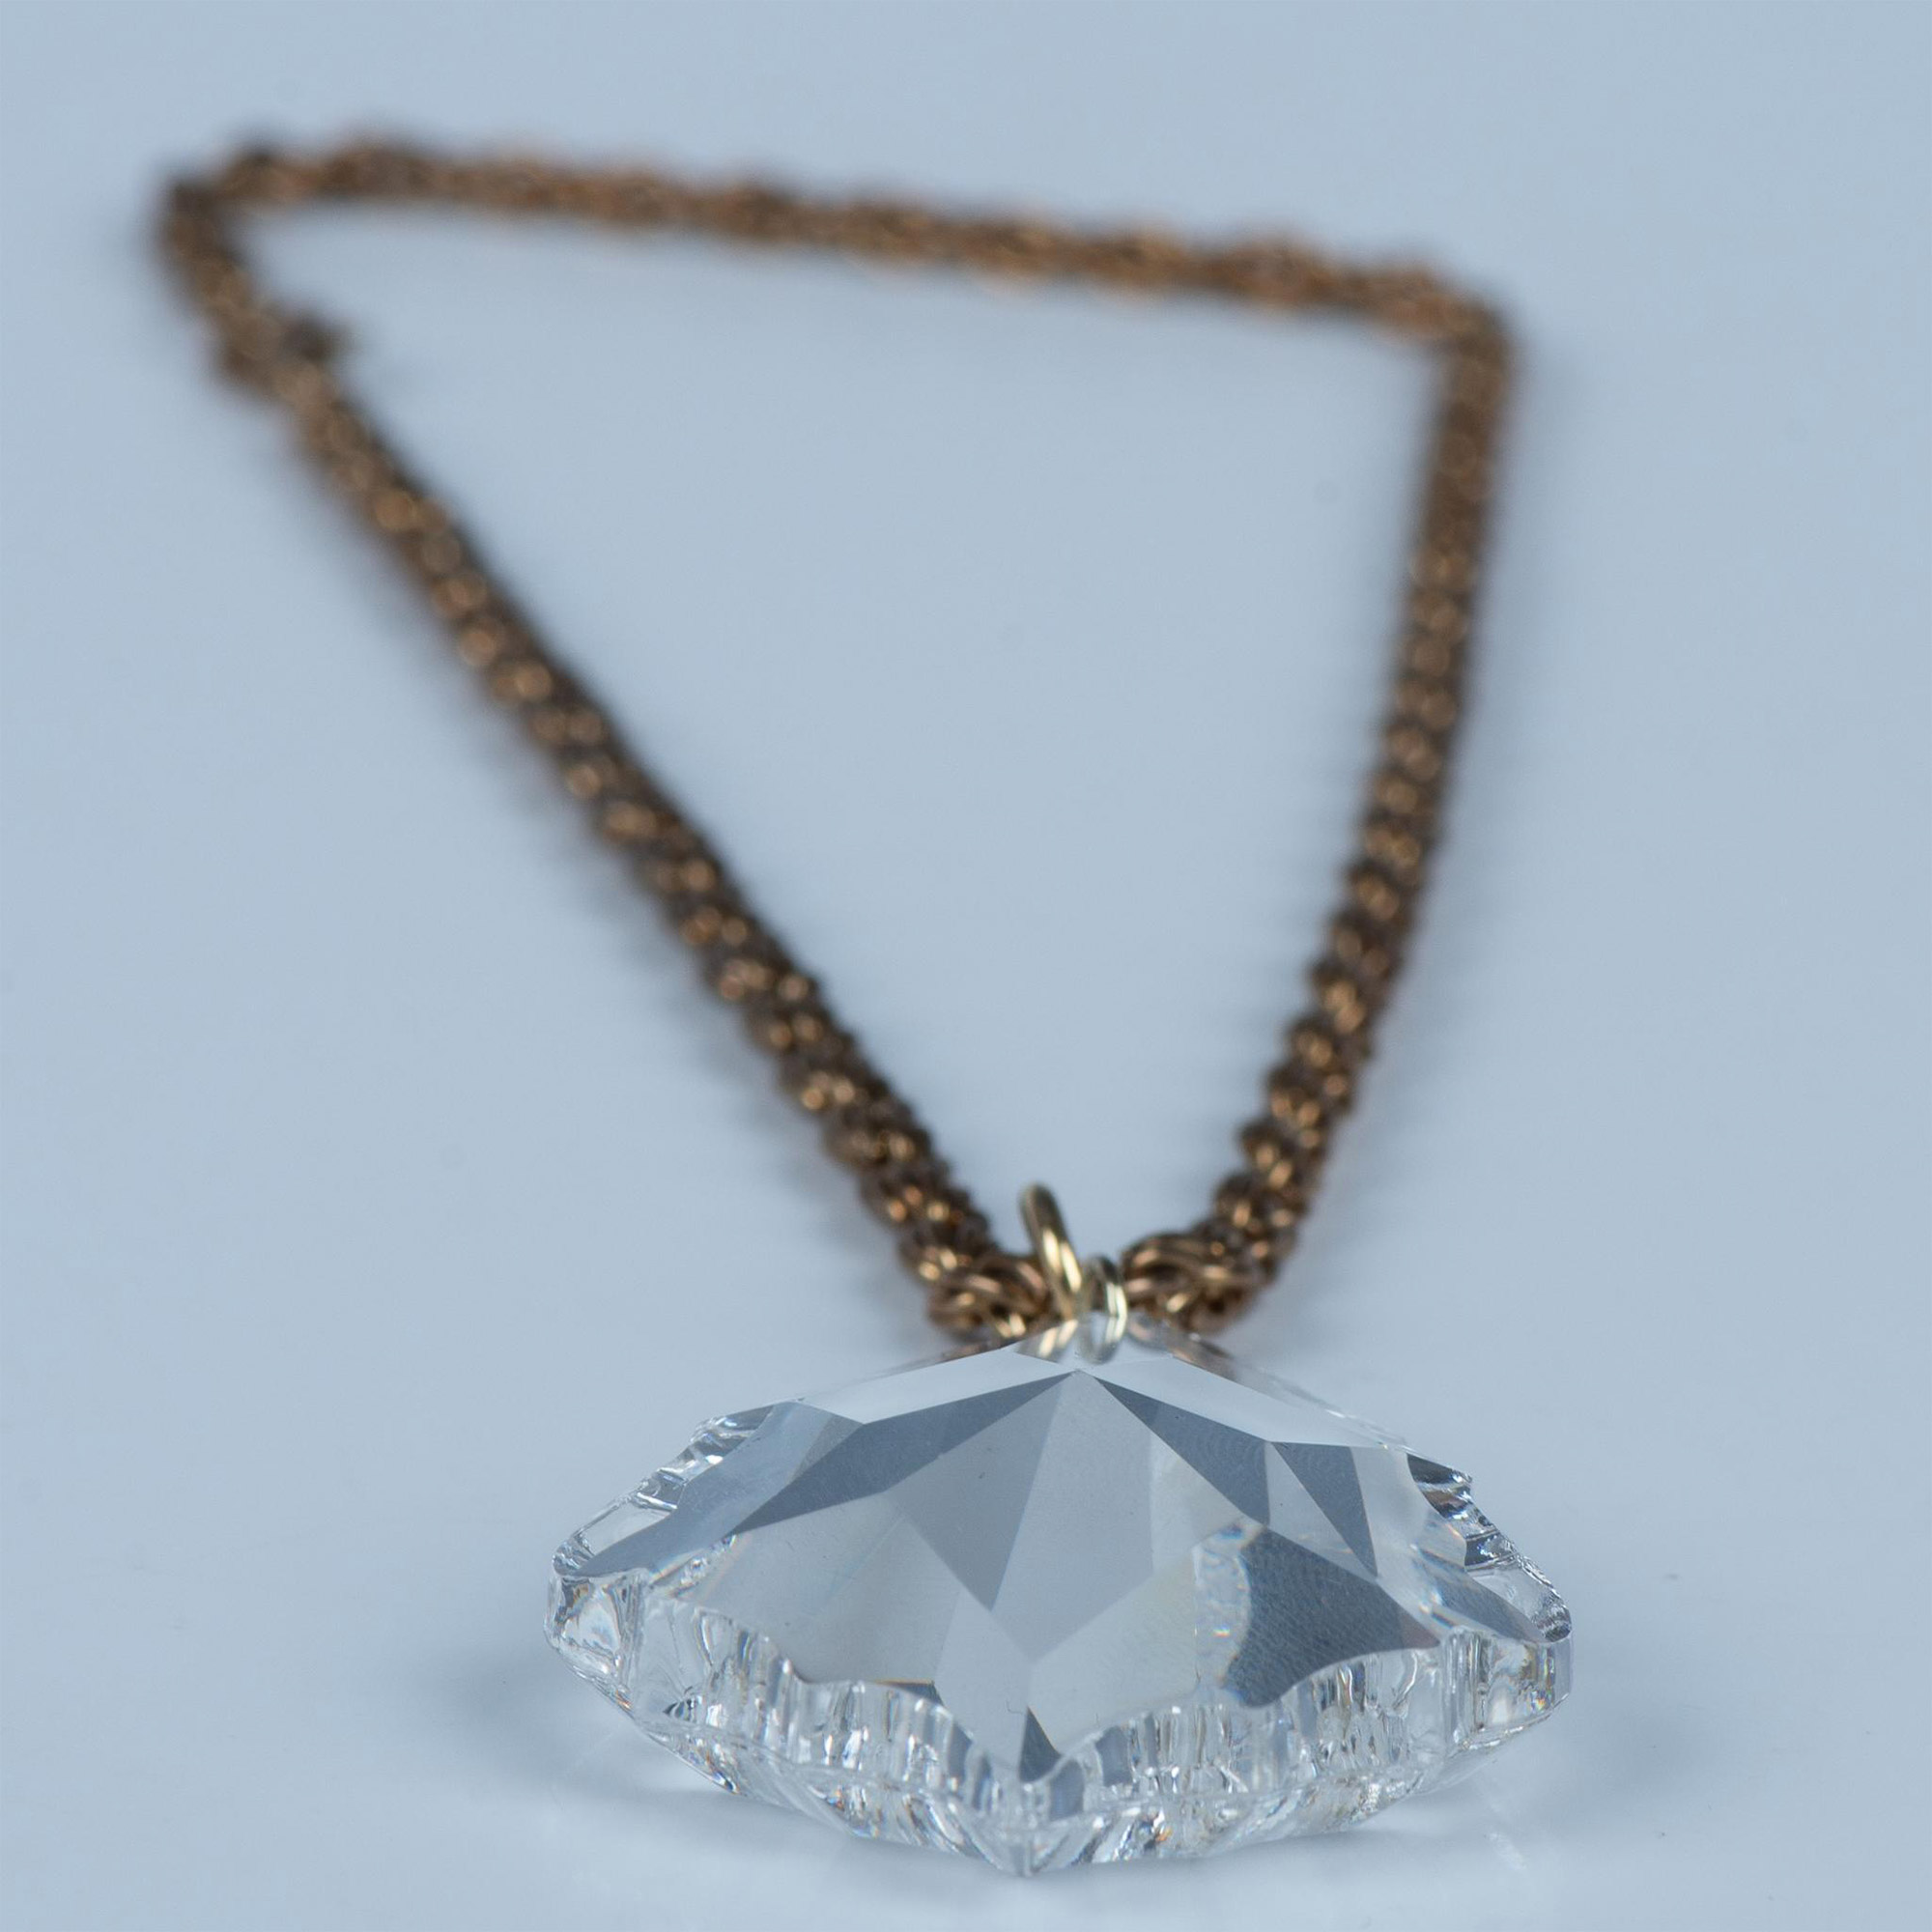 Gorgeous Large Crystal Chandelier Pendant Necklace - Image 3 of 4